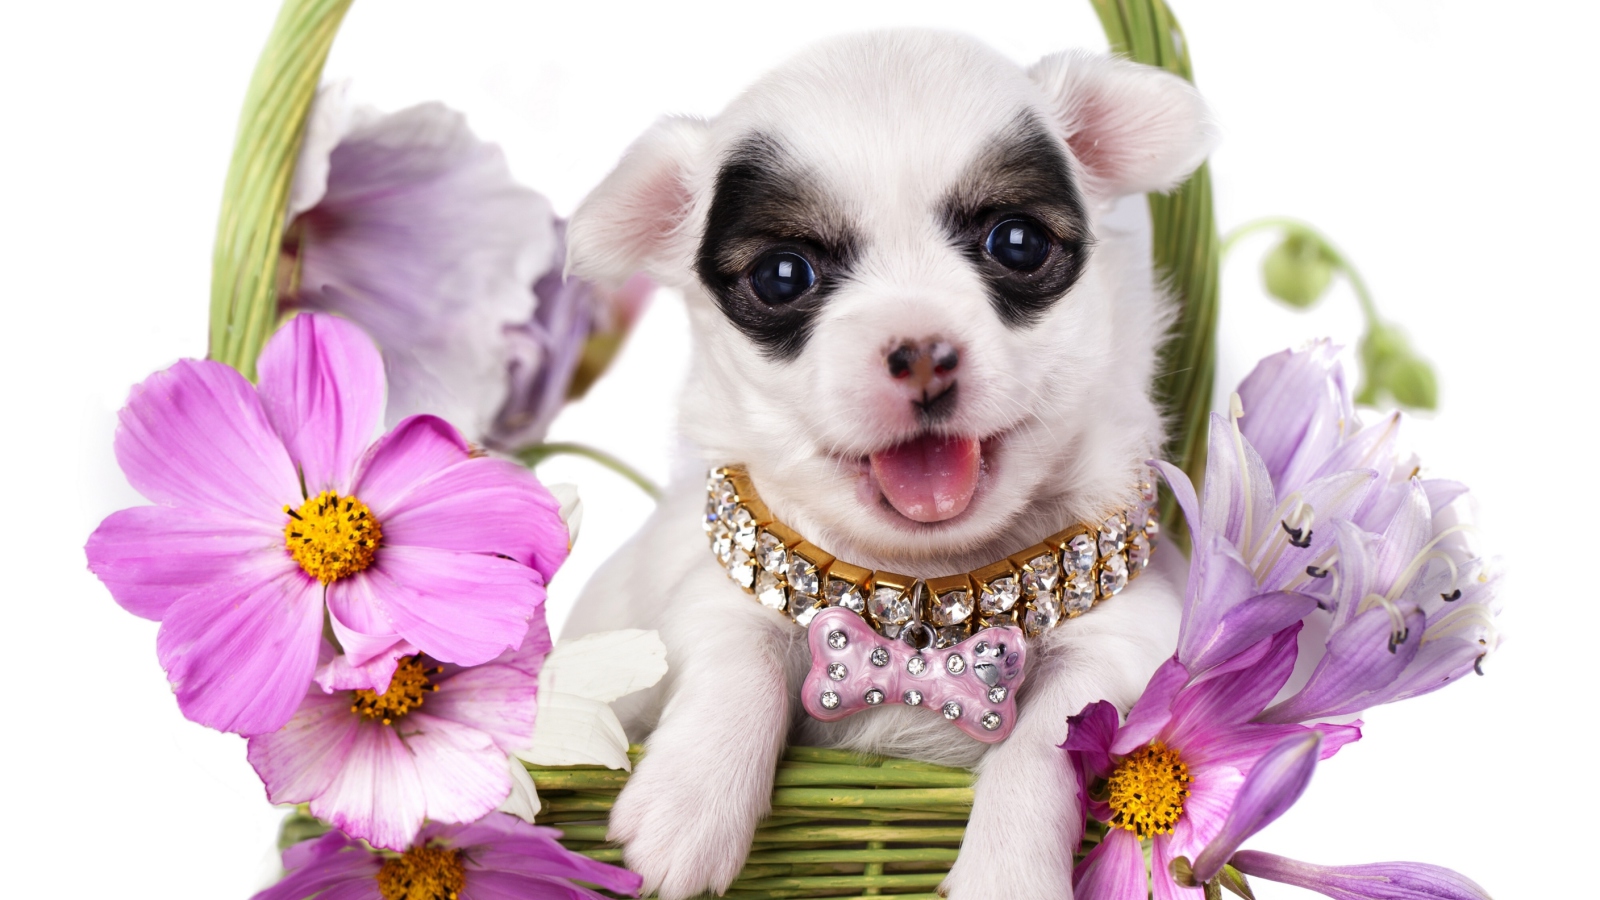 Chihuahua In Flowers wallpaper 1600x900